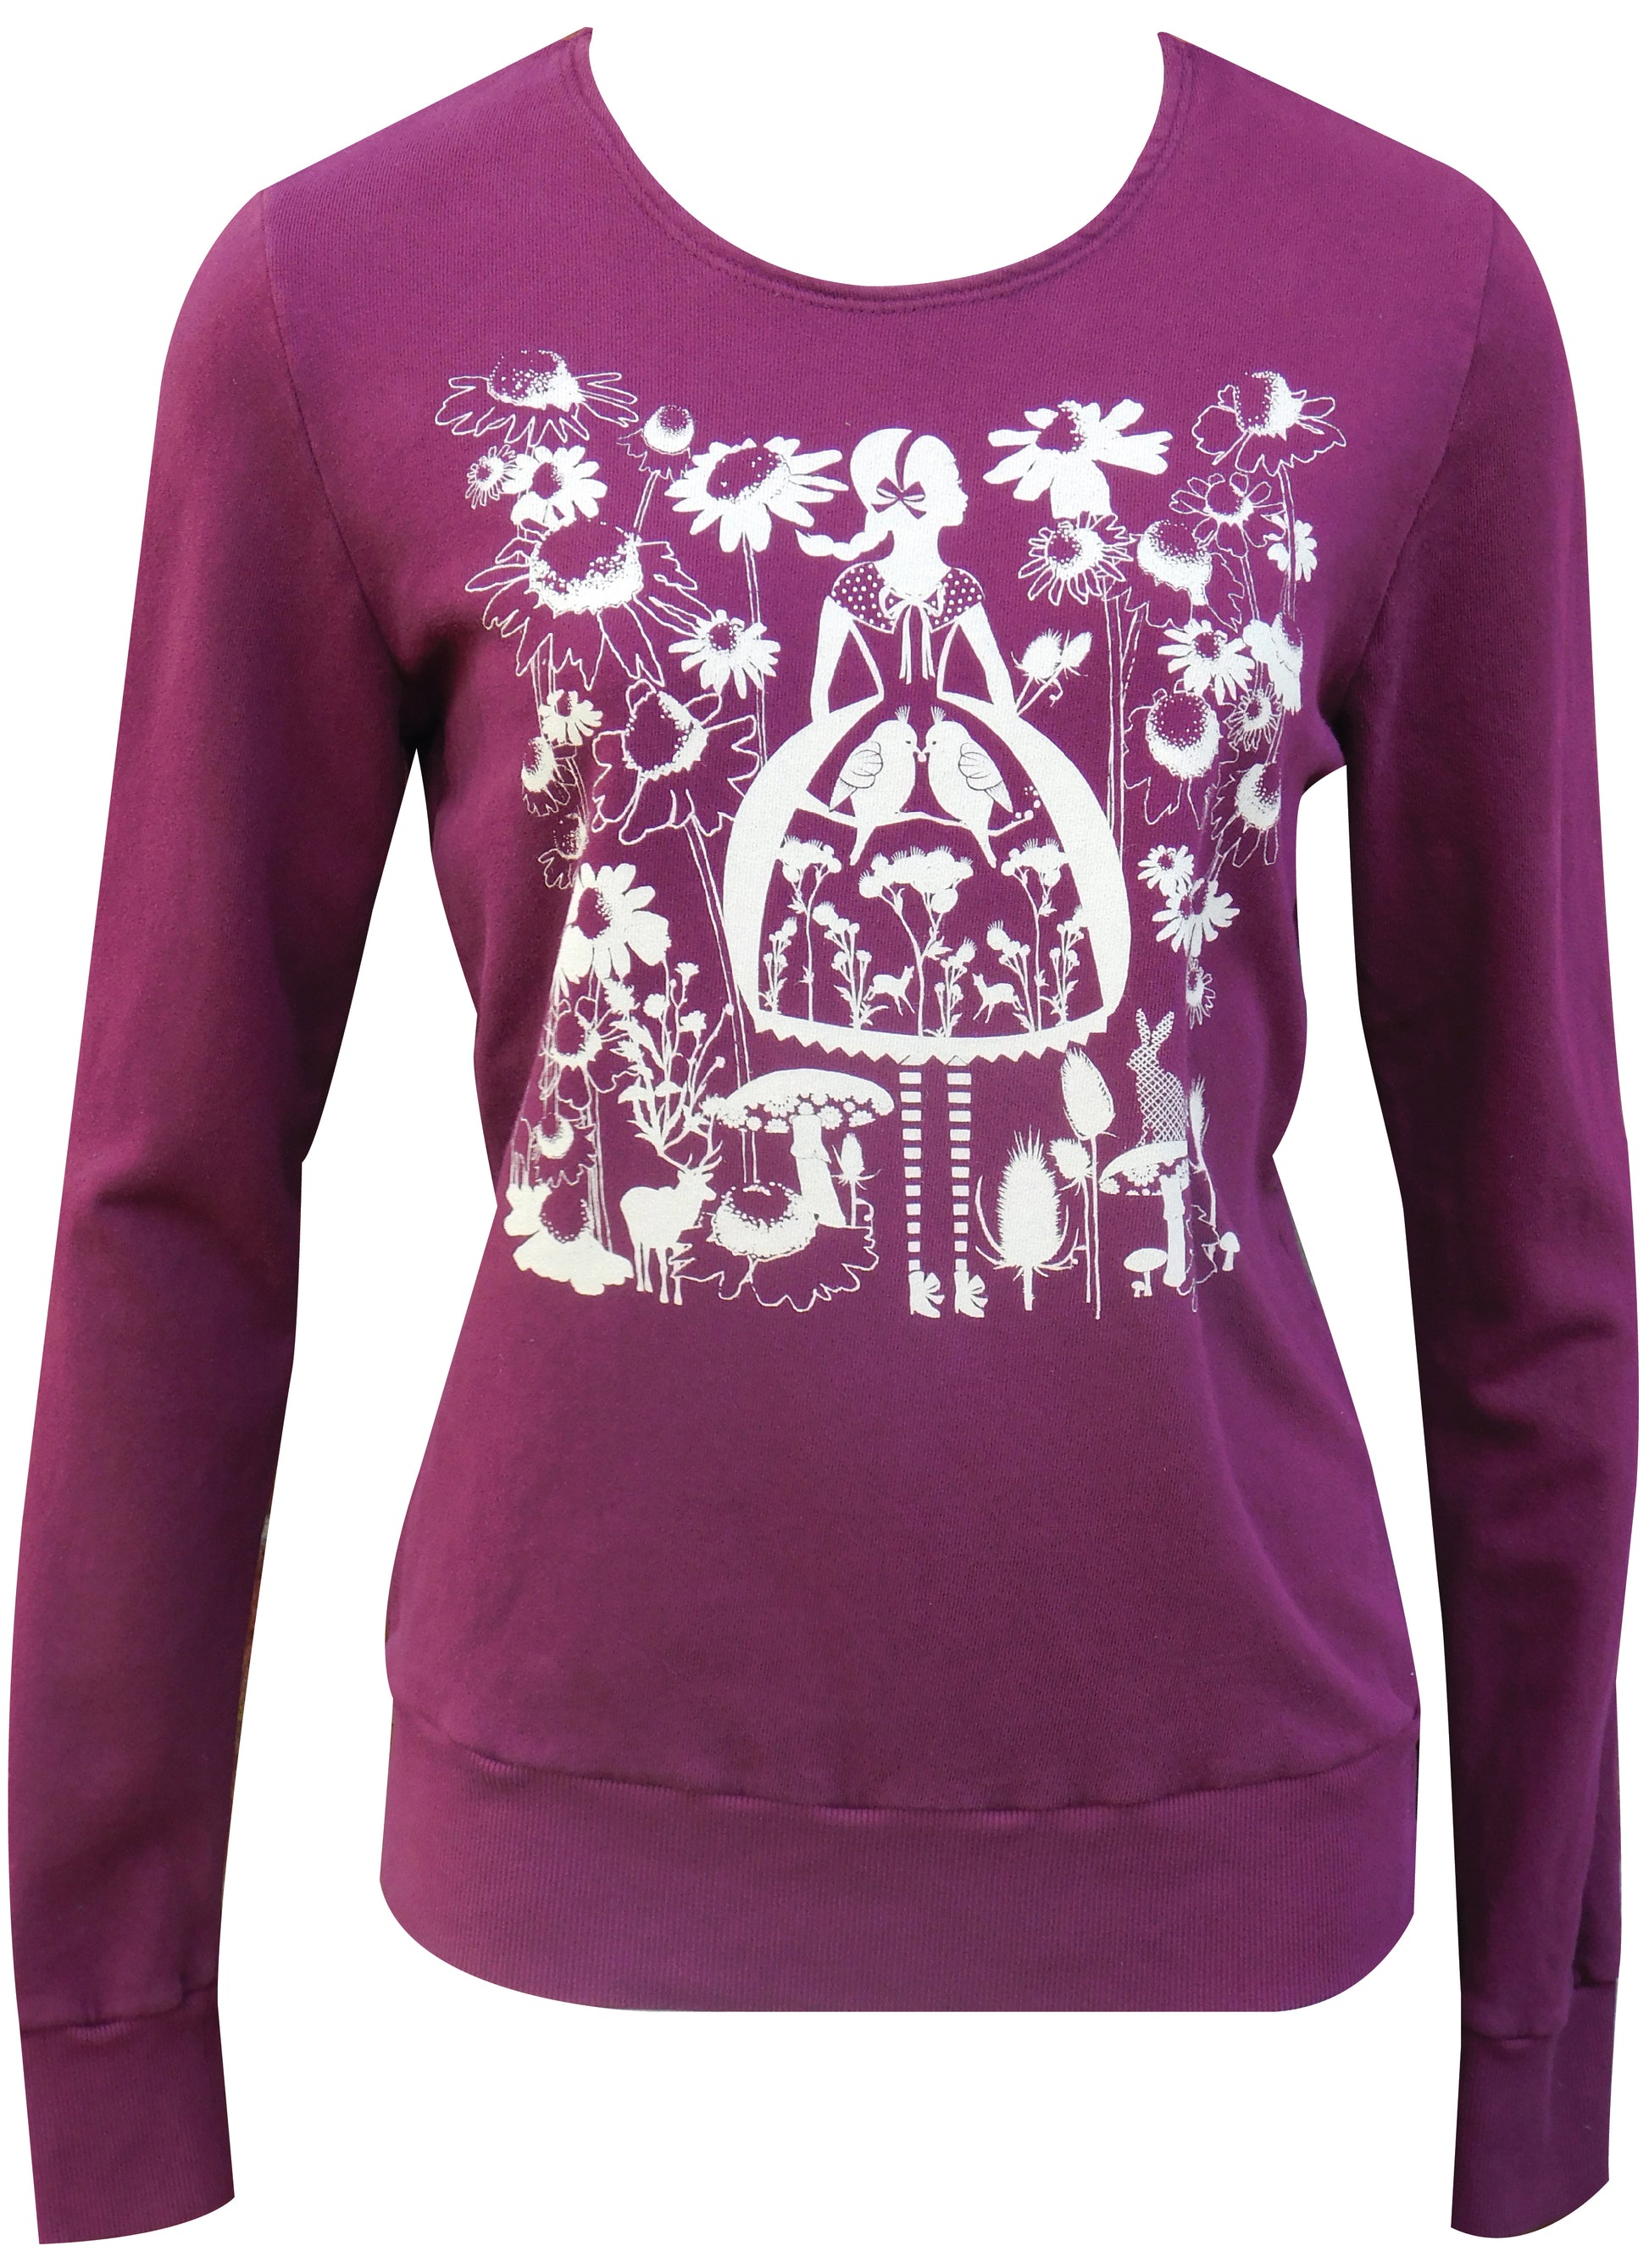 Plum sweatshirt with white screen print of cute girl surrounded by flora and fauna